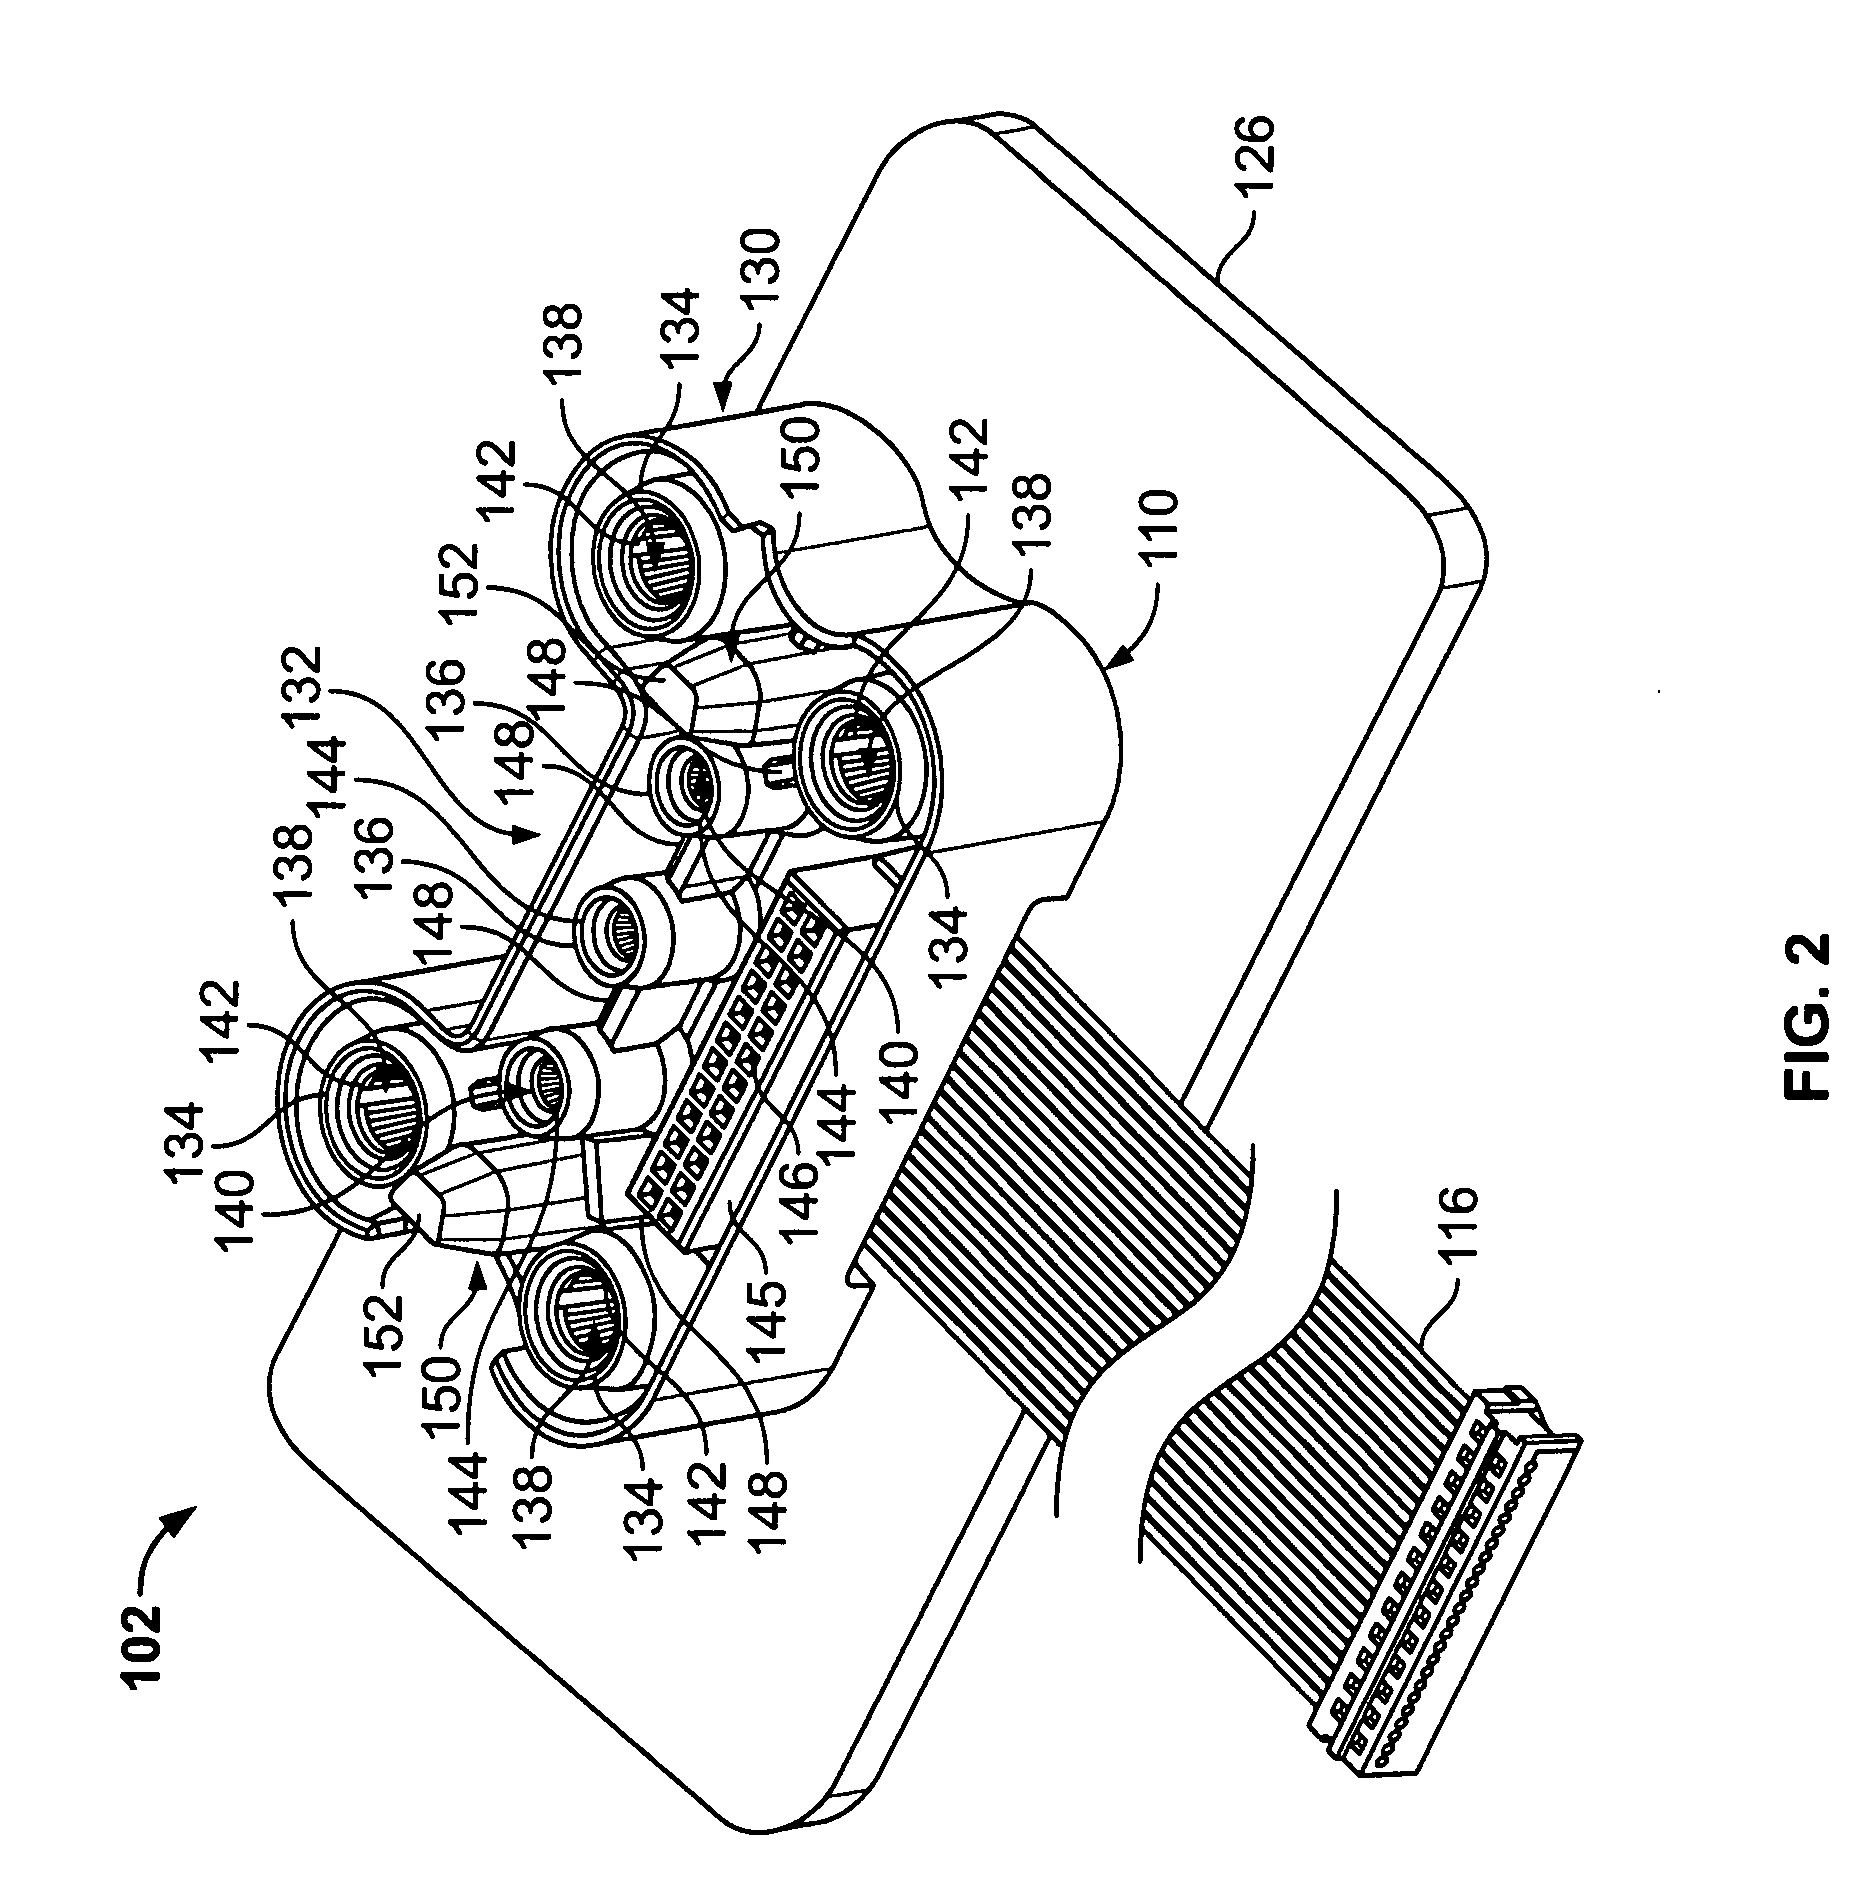 Interconnect module with integrated signal and power delivery